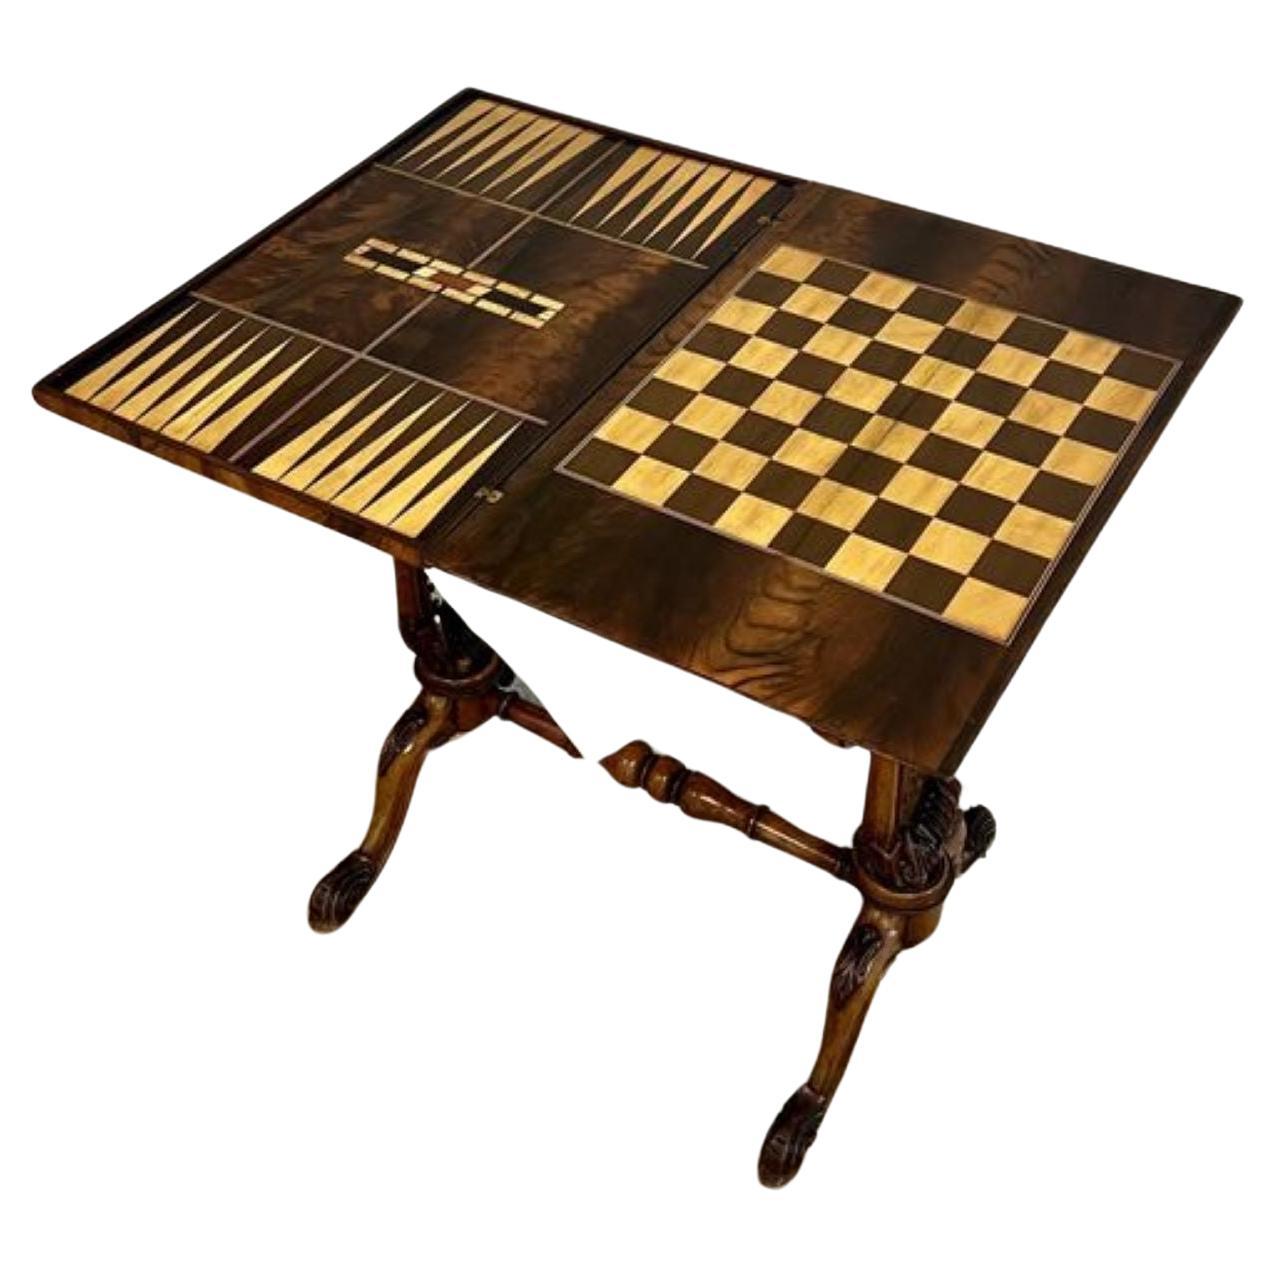 Outstanding quality antique Victorian burr walnut marquetry games table